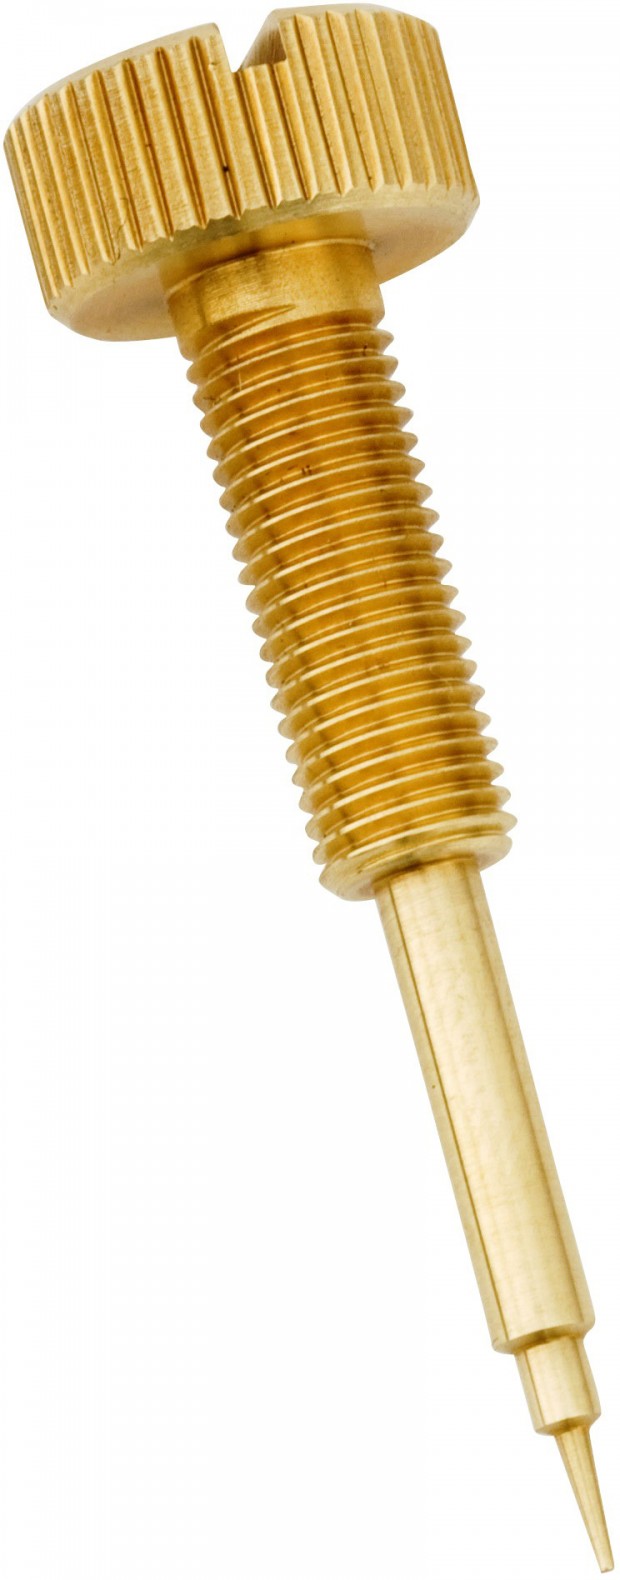 CV Performance is Proud to Announce the 25th Anniversary of the Original EZ-Just Mixture Screw